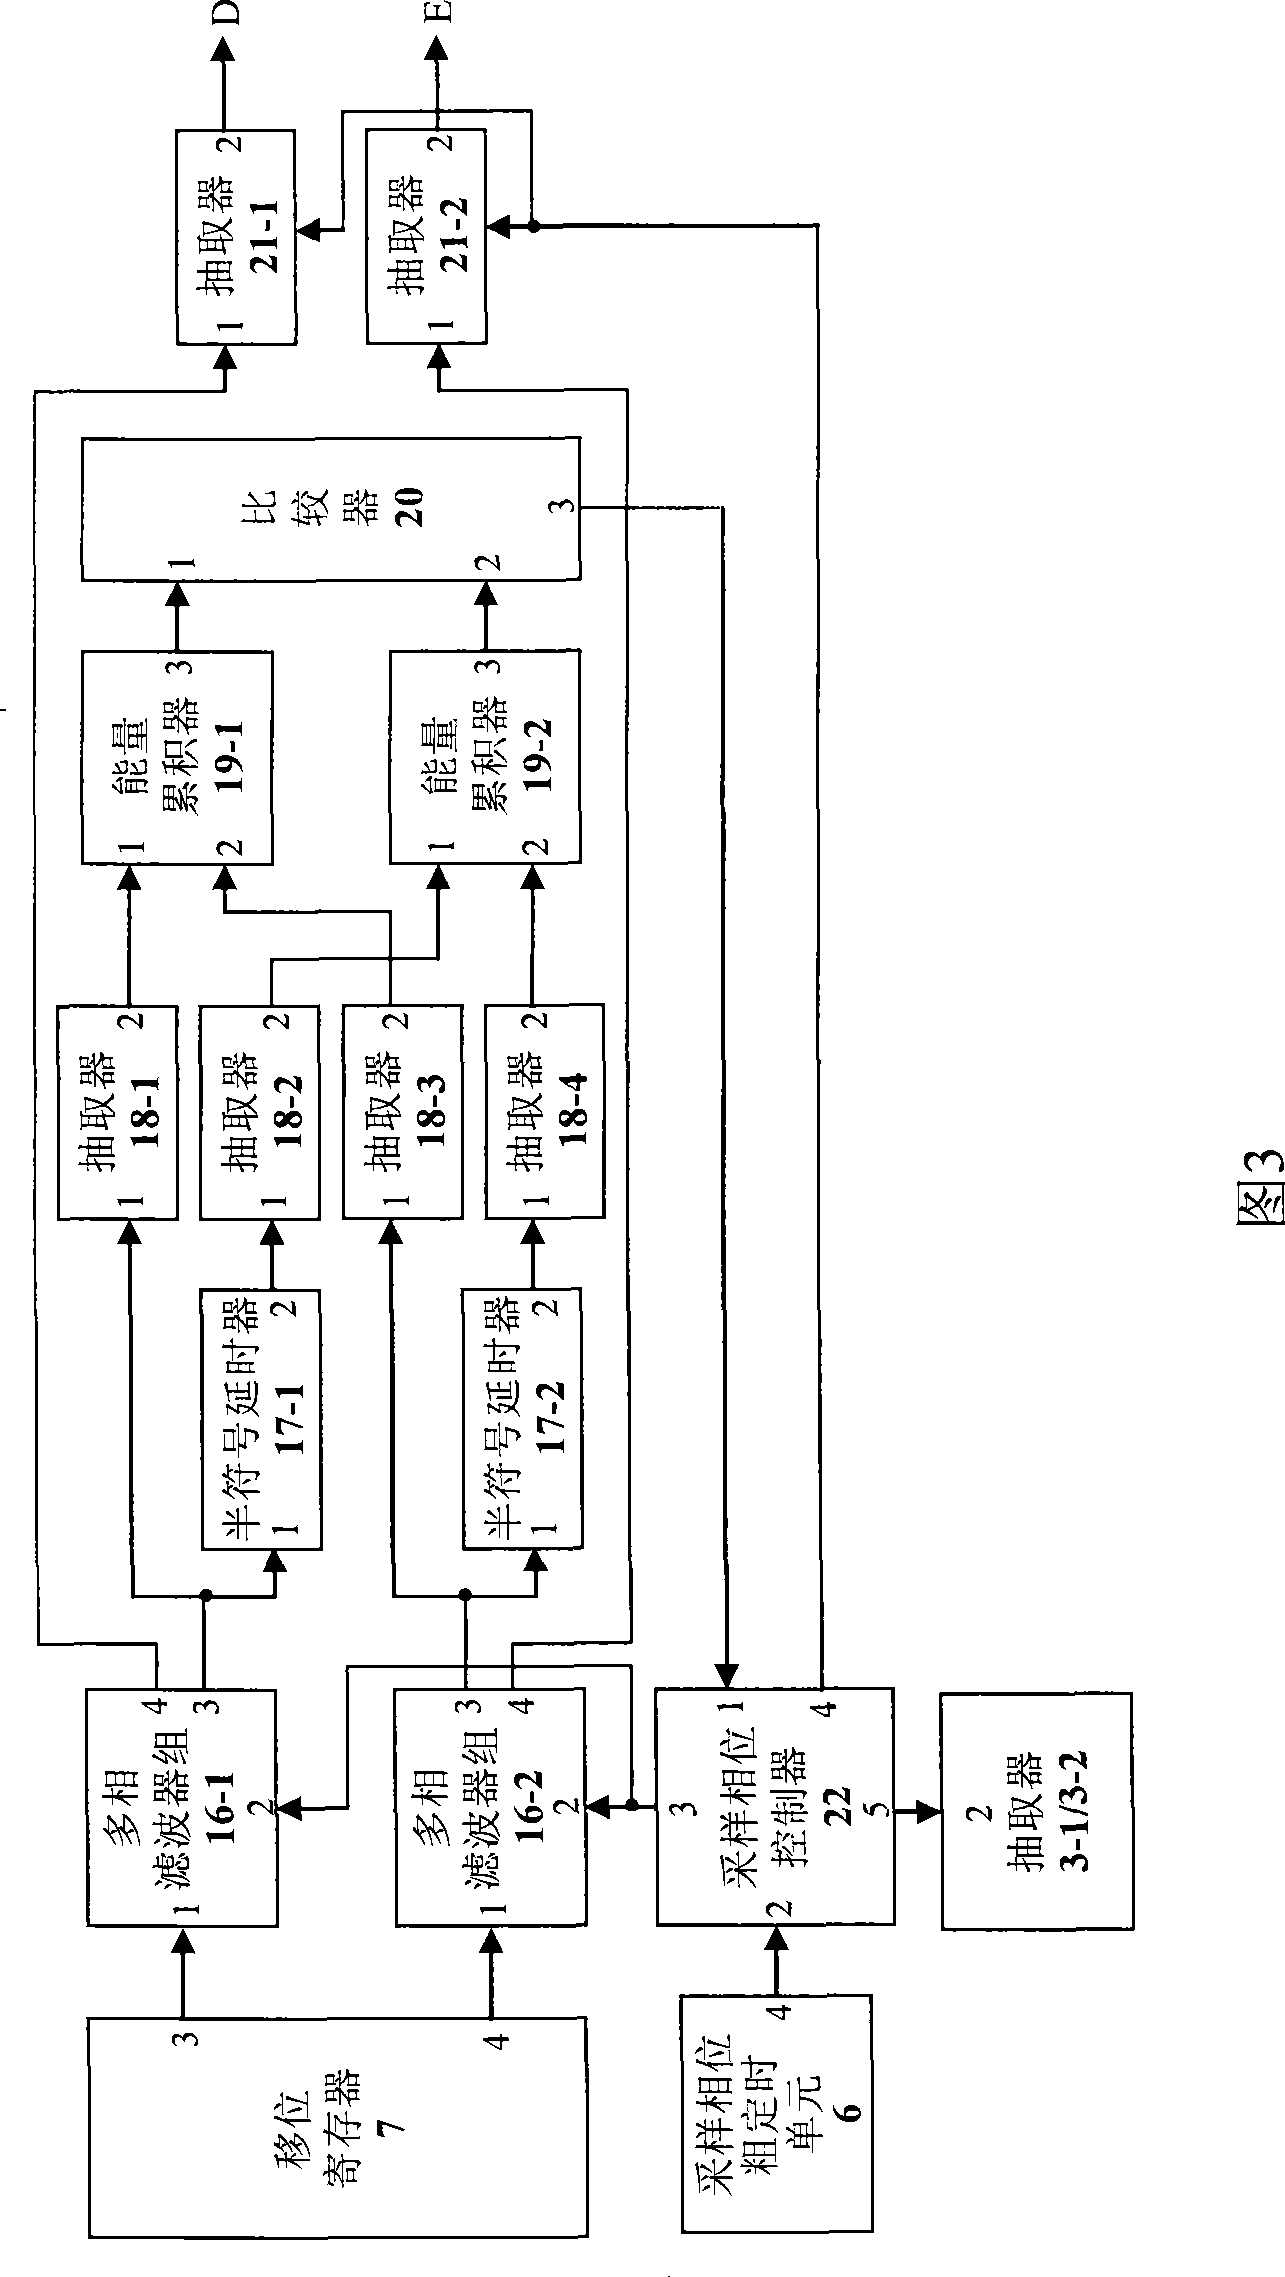 Multi-path symbol resistant timing synchronization device